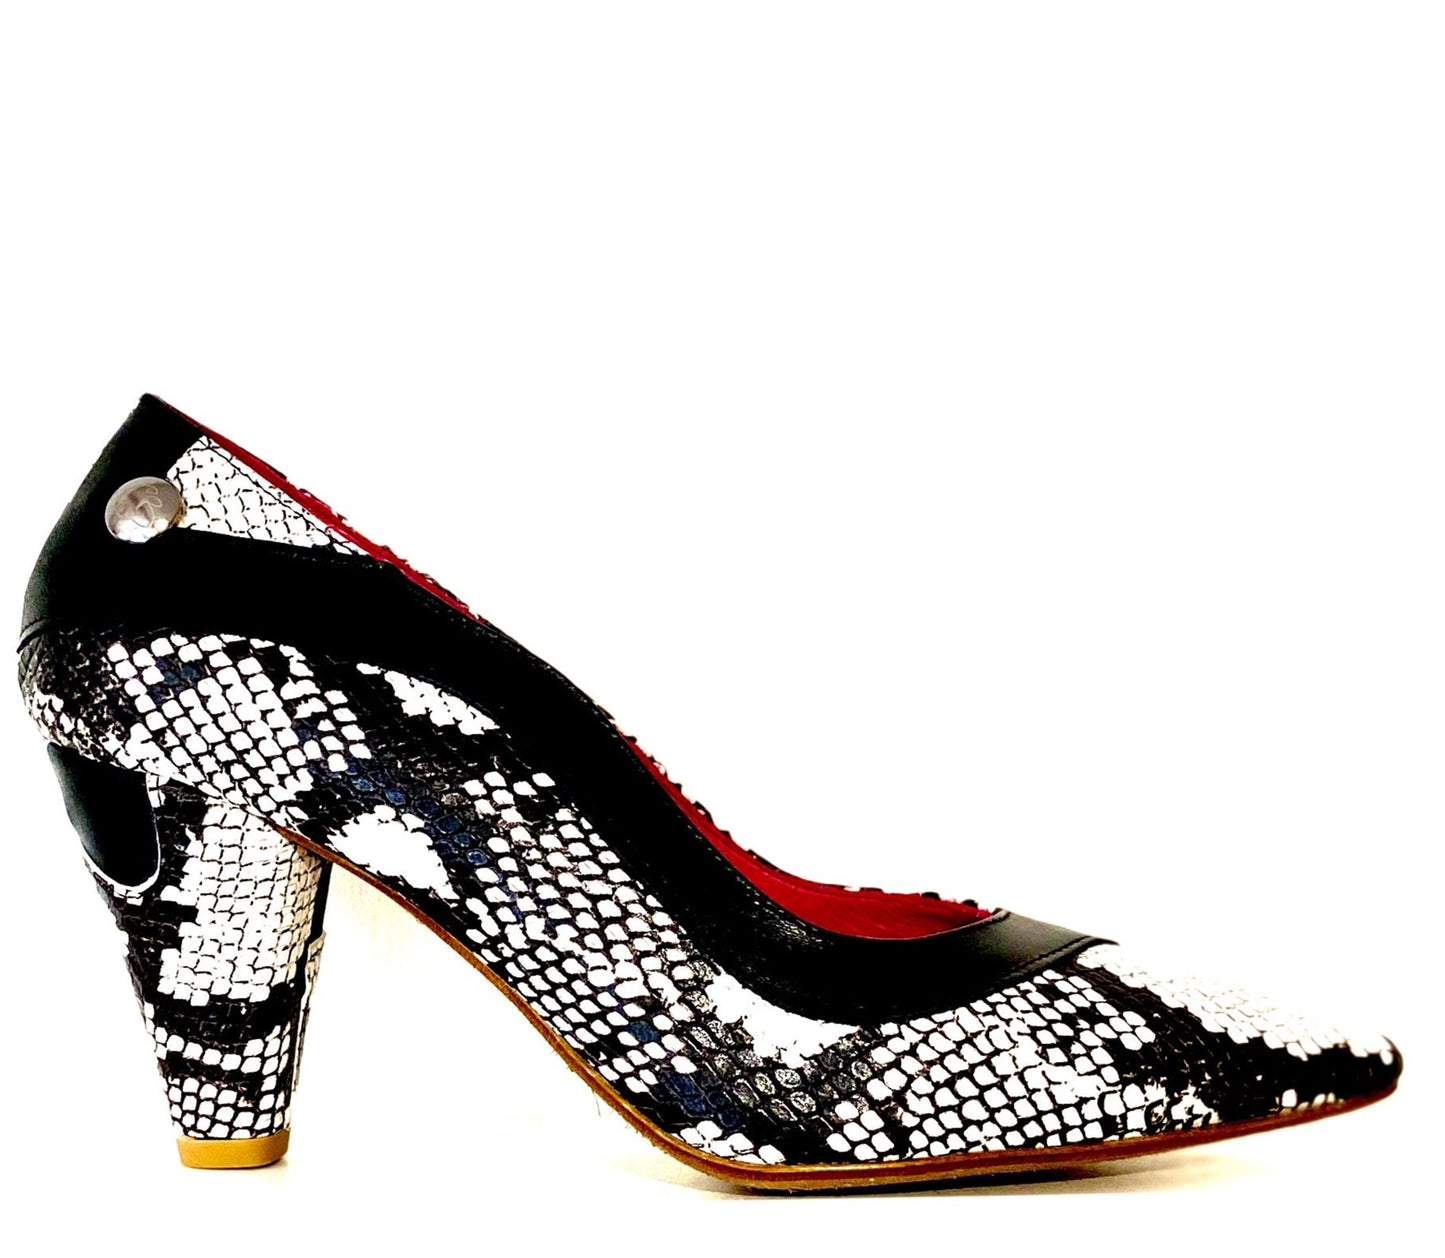 Salon - Black and White snake print LAST PAIRS 36 AND 38!